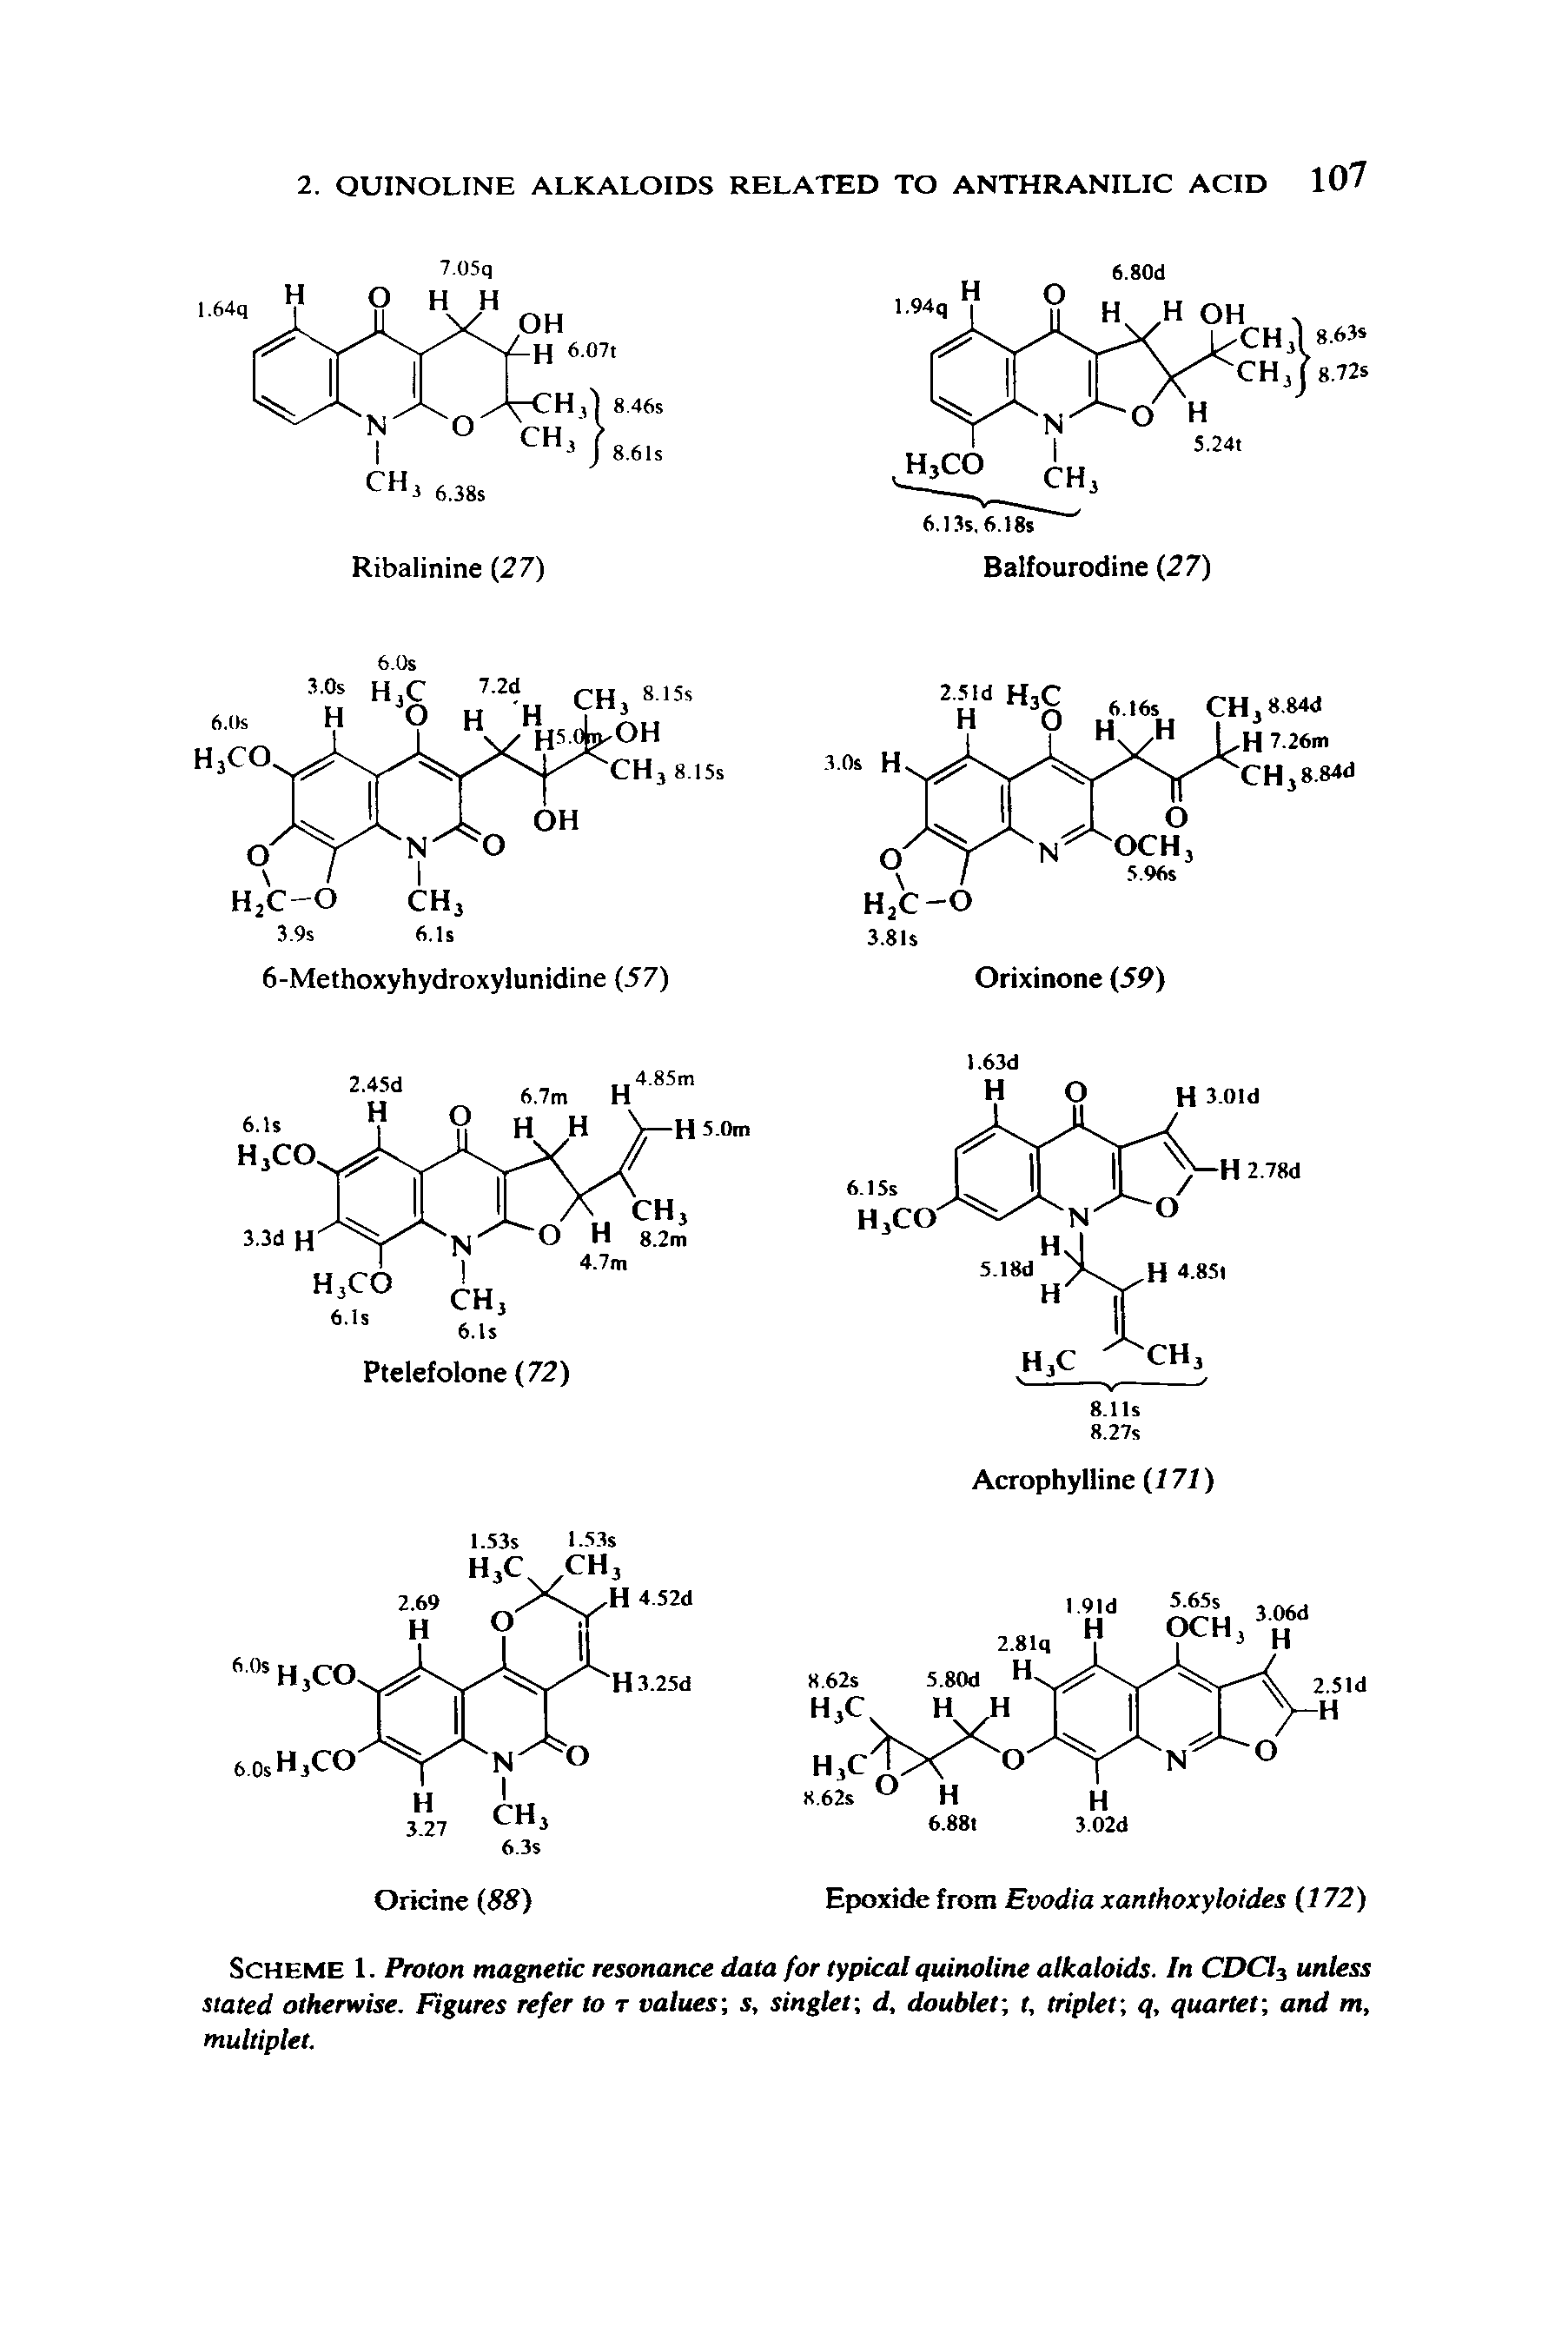 Scheme 1. Proton magnetic resonance data for typical quinoline alkaloids. In CDCl3 unless stated otherwise. Figures refer to values-, s, singlet-, d, doubler, t, triplet q, quartet and m, multiplet.